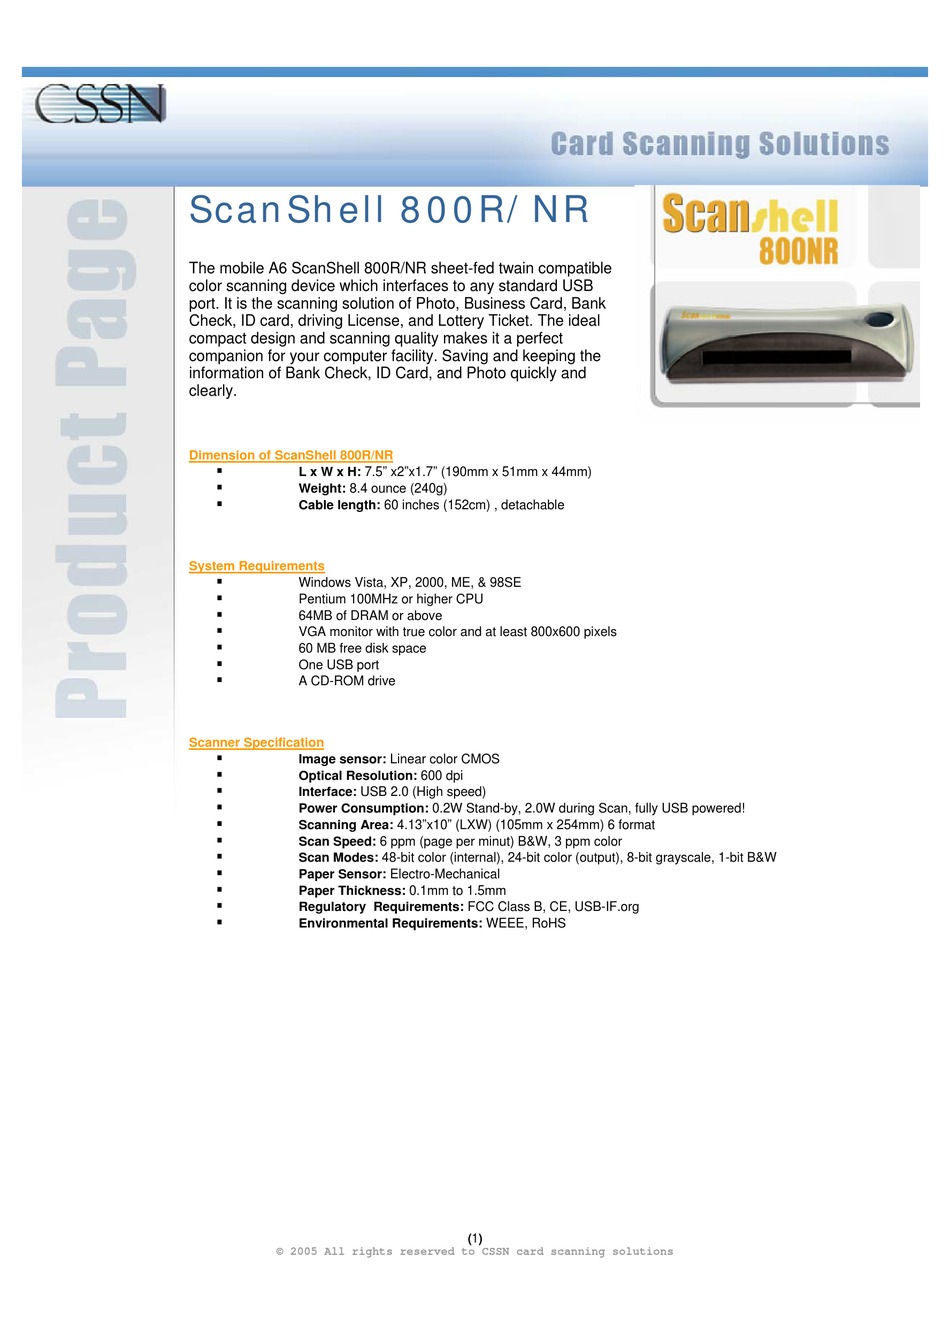 CSSN SCANSHELL 800NR SCANNER SPECIFICATIONS | ManualsLib